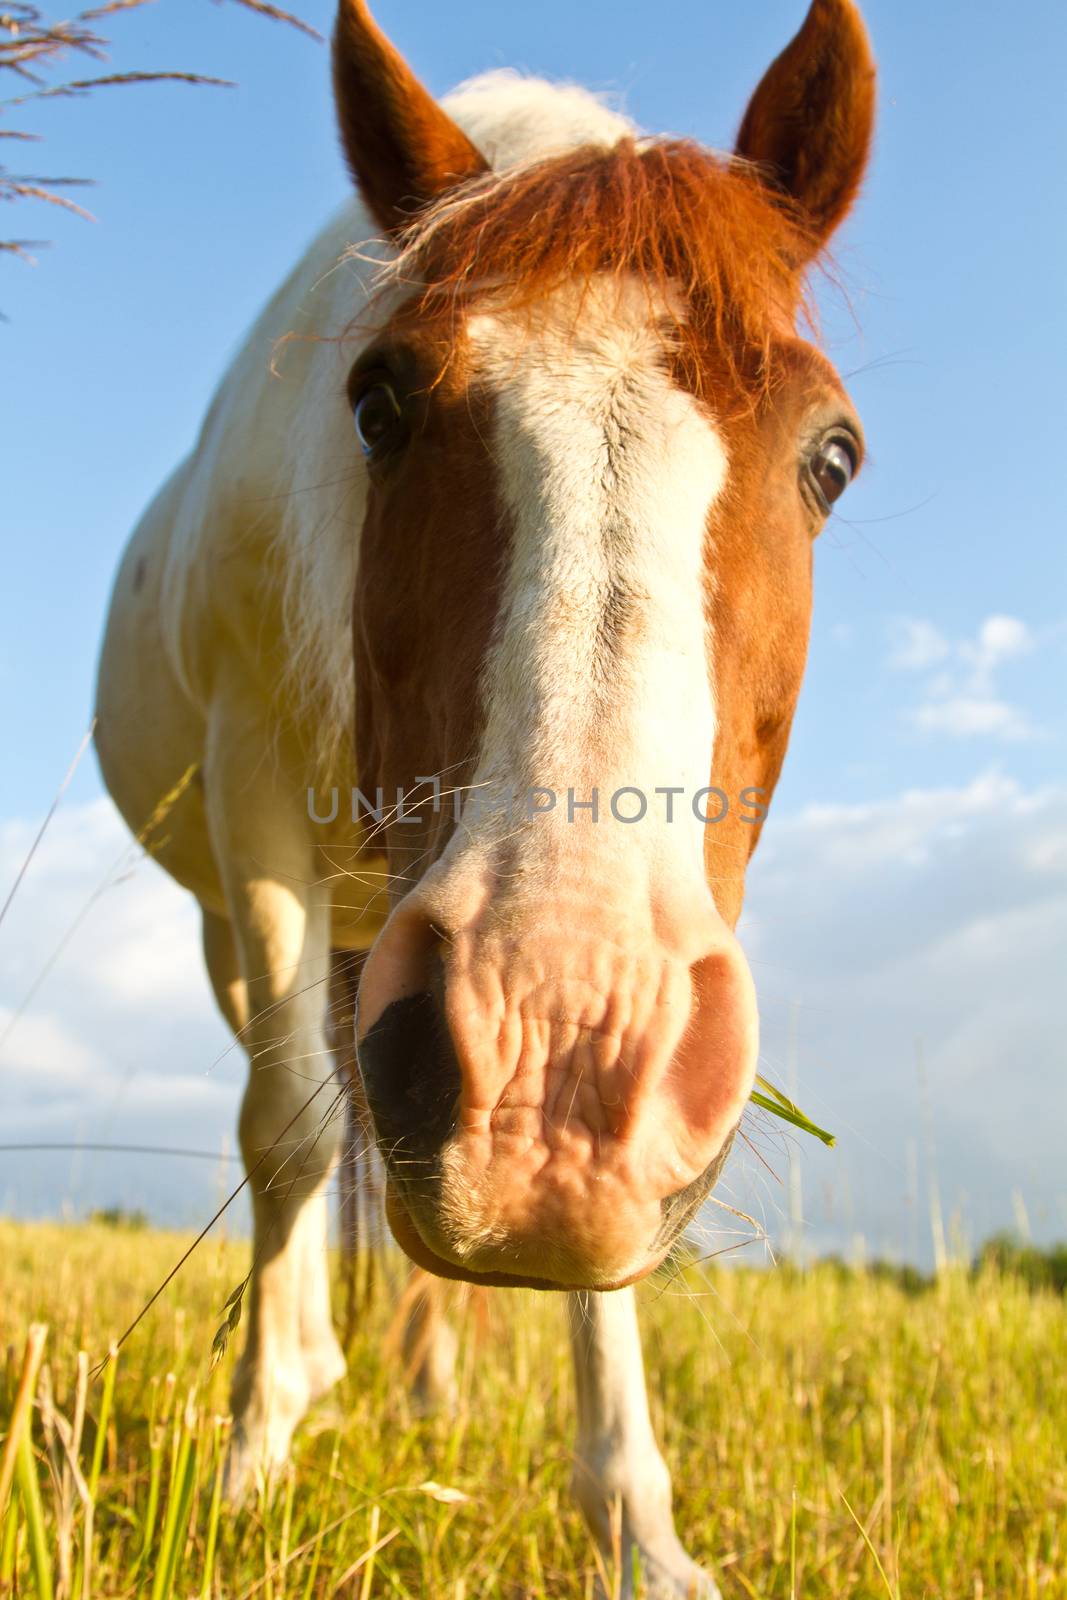 Horse in denmark and blue sky by jeancliclac